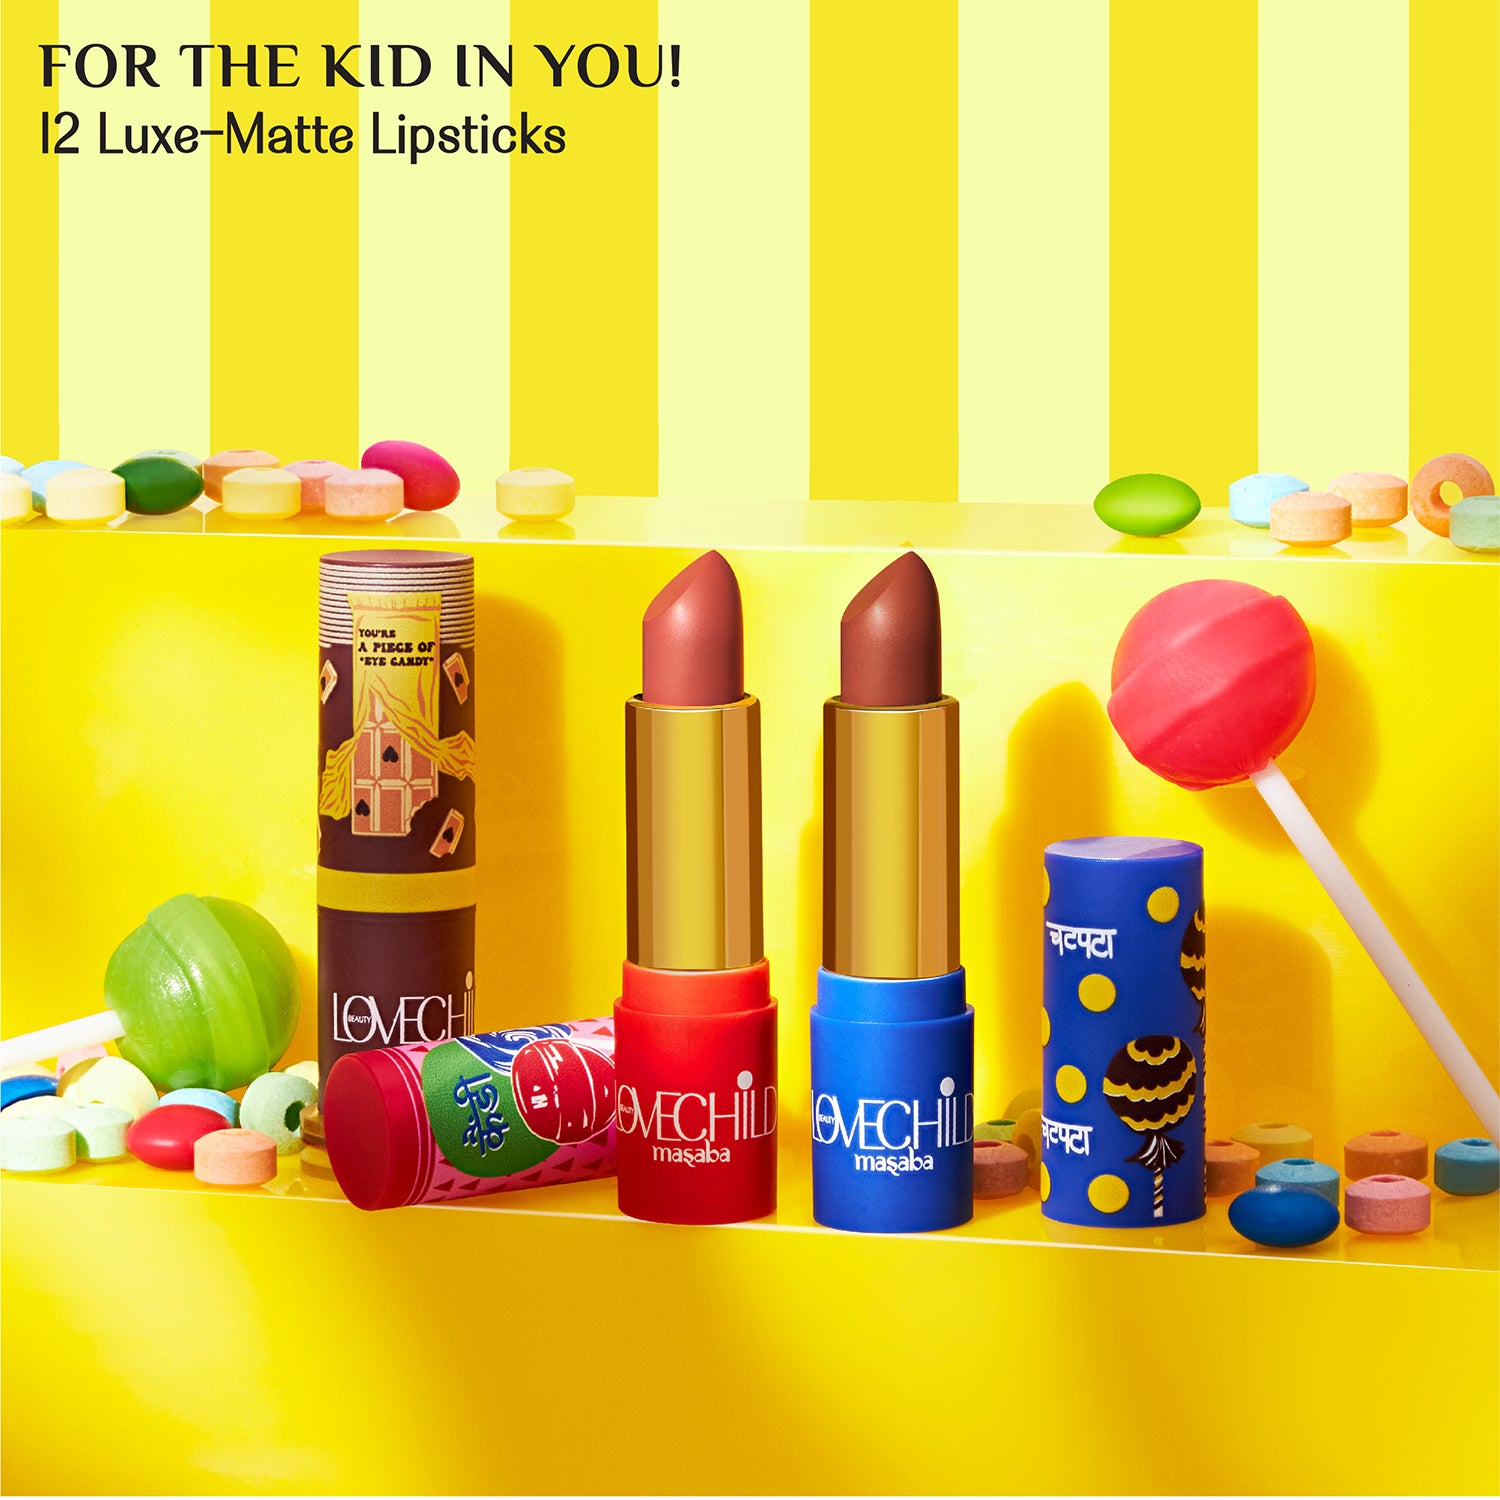 LoveChild Masaba - For the Kid in You! - 08 Hey Sugar - Luxe Matte Lipstick